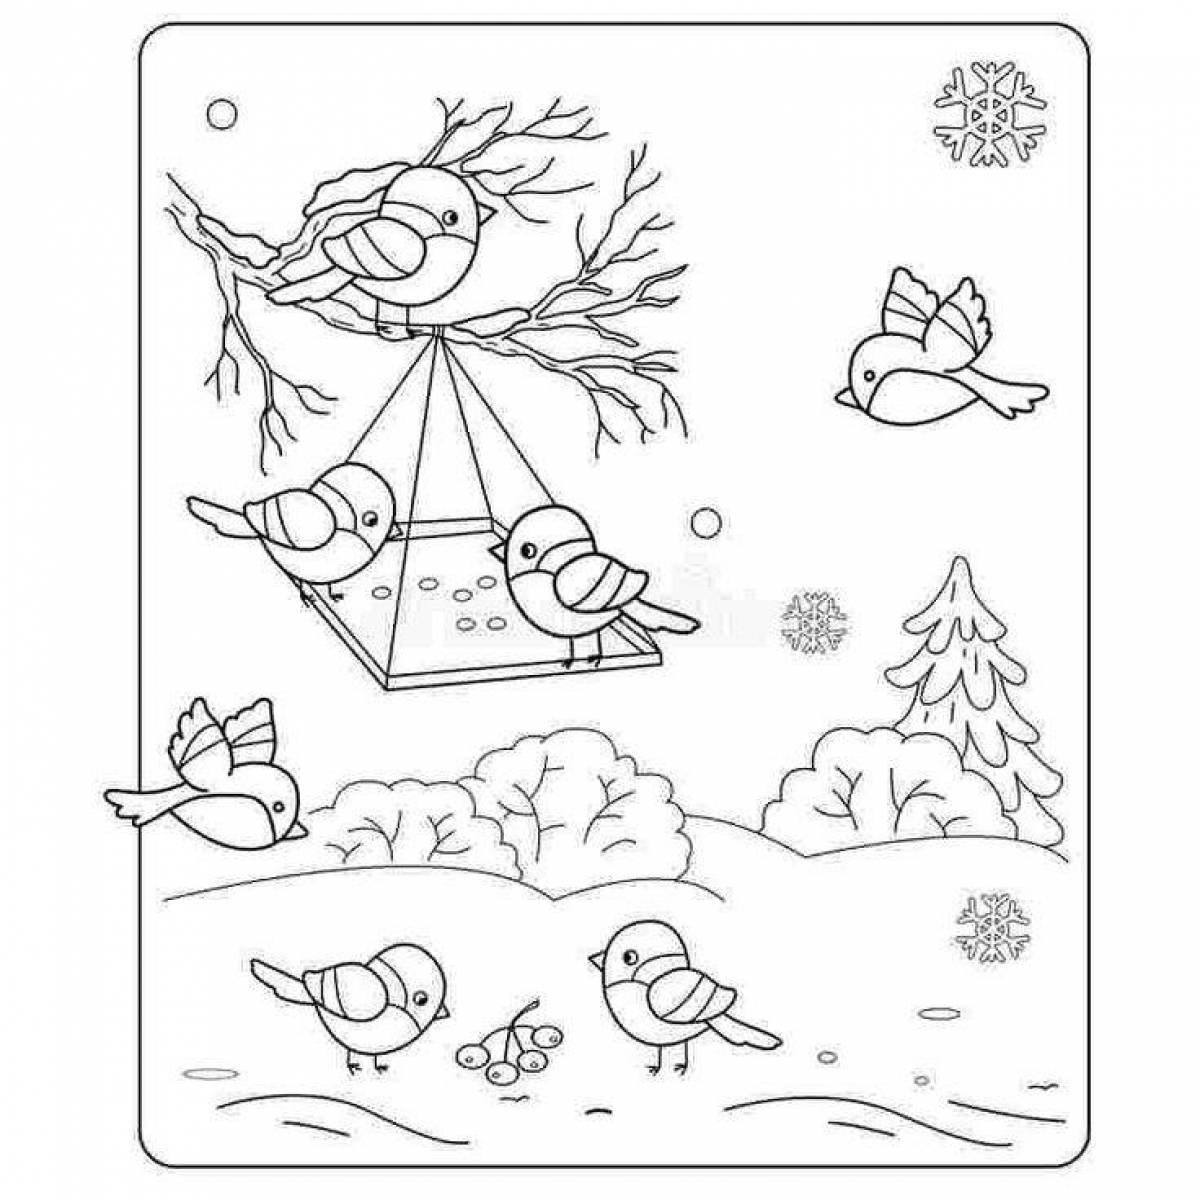 A fascinating coloring book of wintering birds for children 4-5 years old